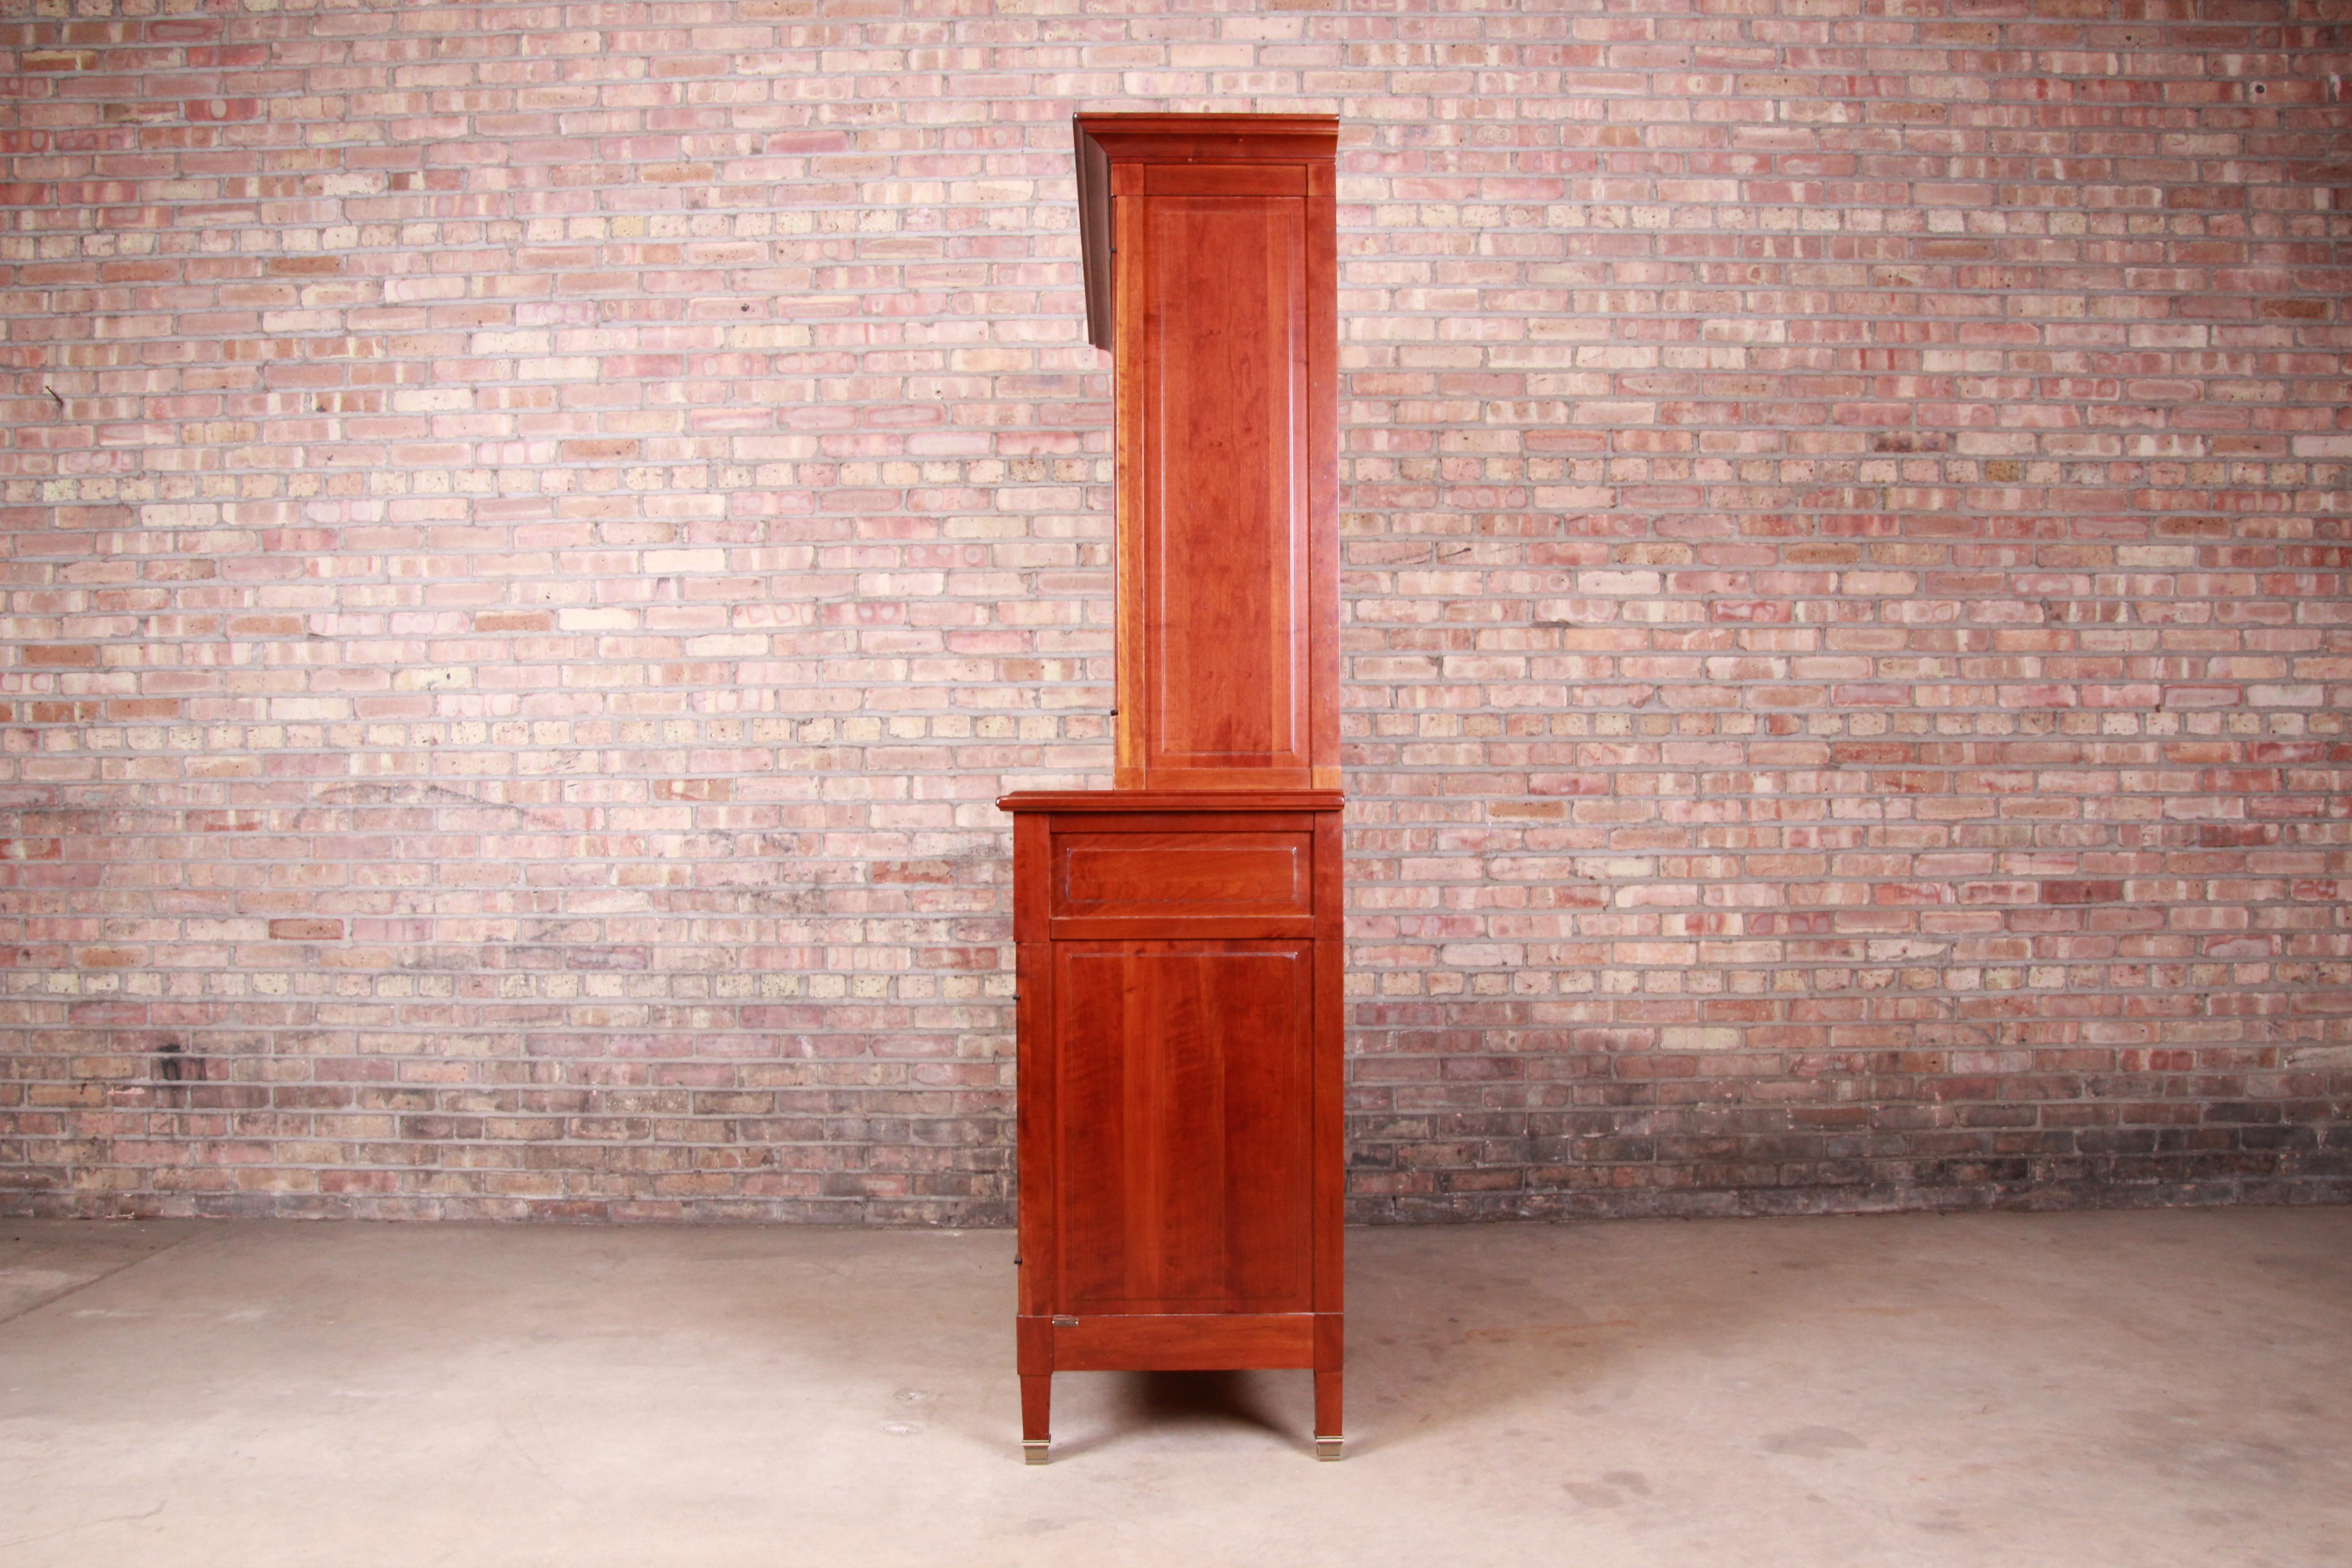 French Provincial Solid Cherry Breakfront Bookcase or Bar Cabinet by Grange 8